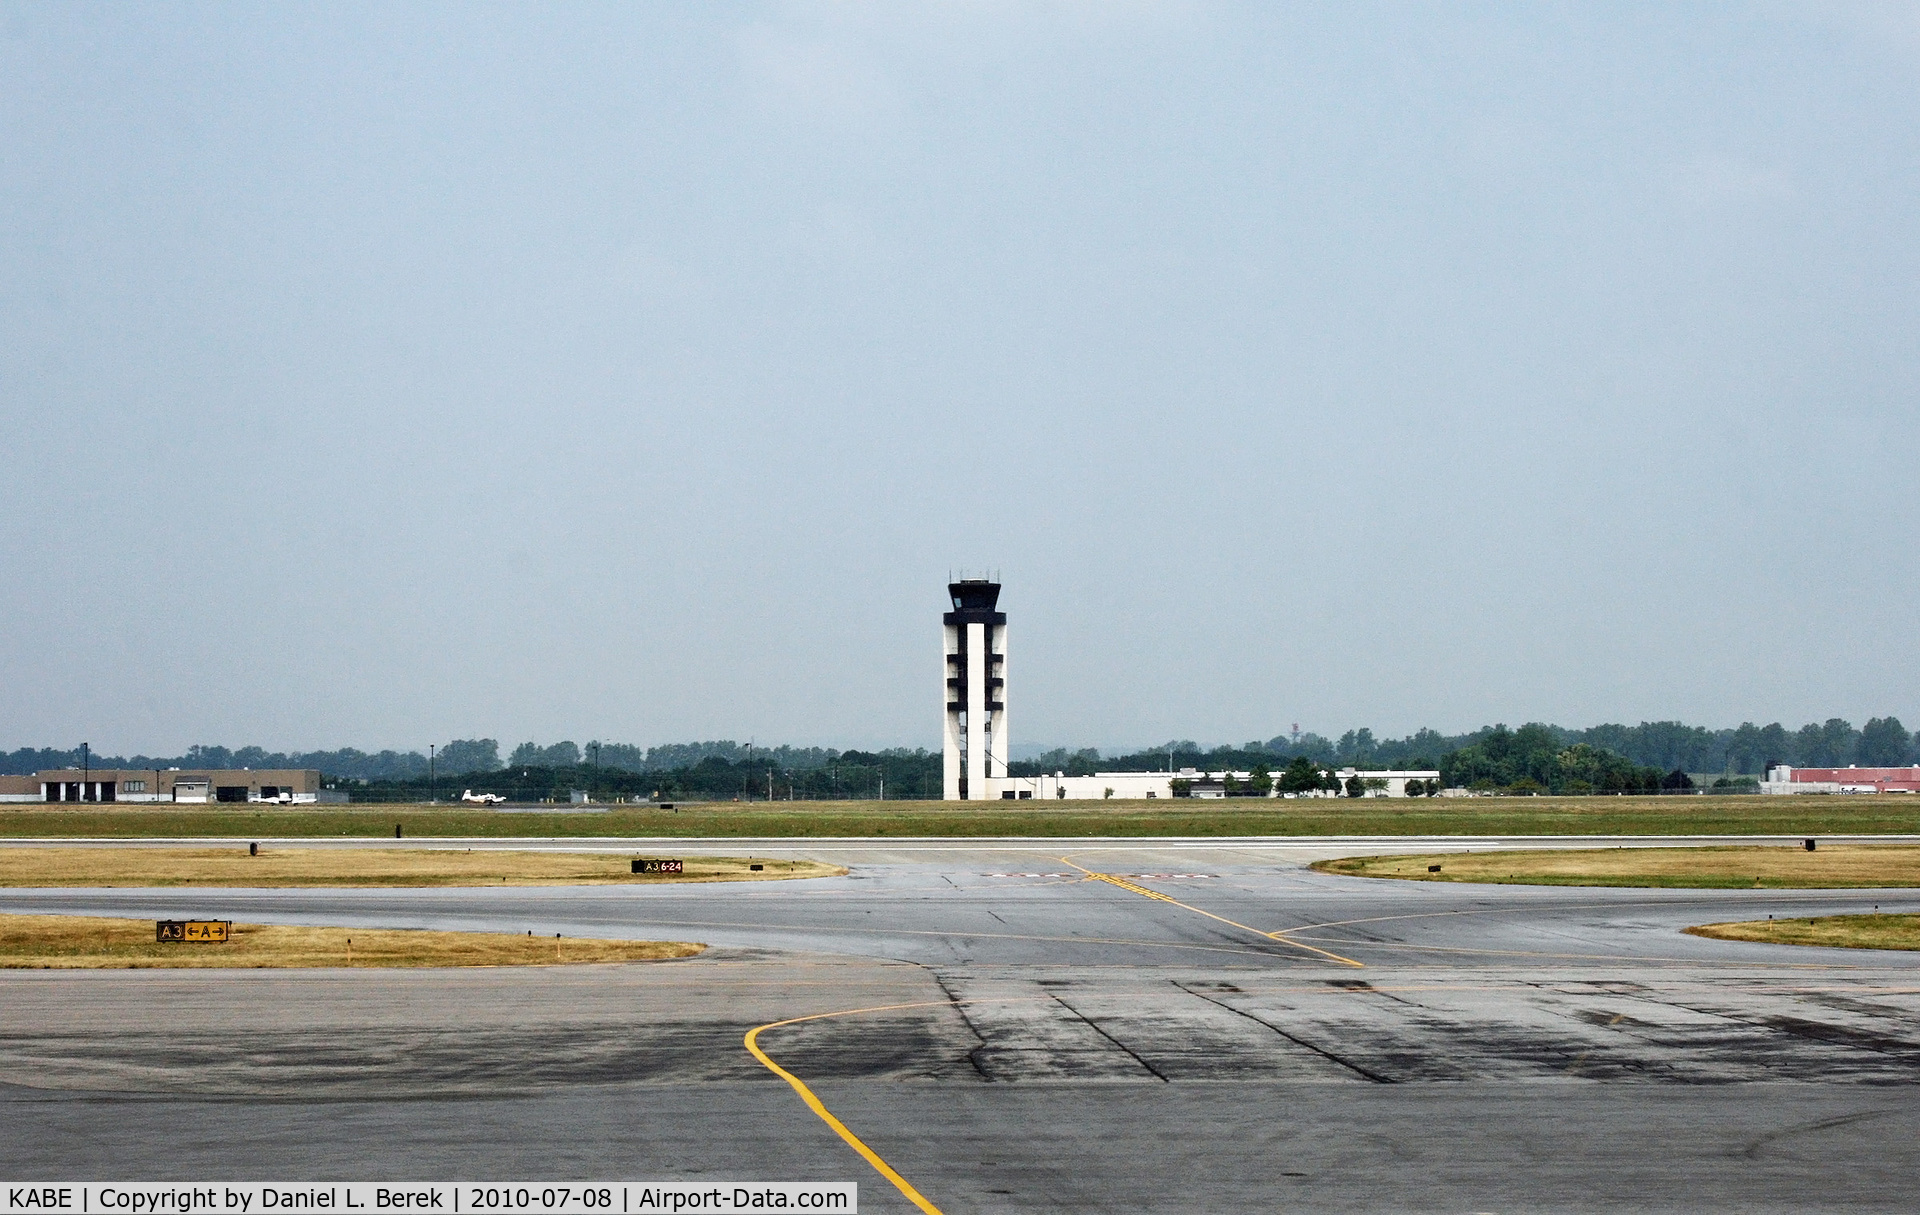 Lehigh Valley International Airport (ABE) - This is an overview of the new control tower.